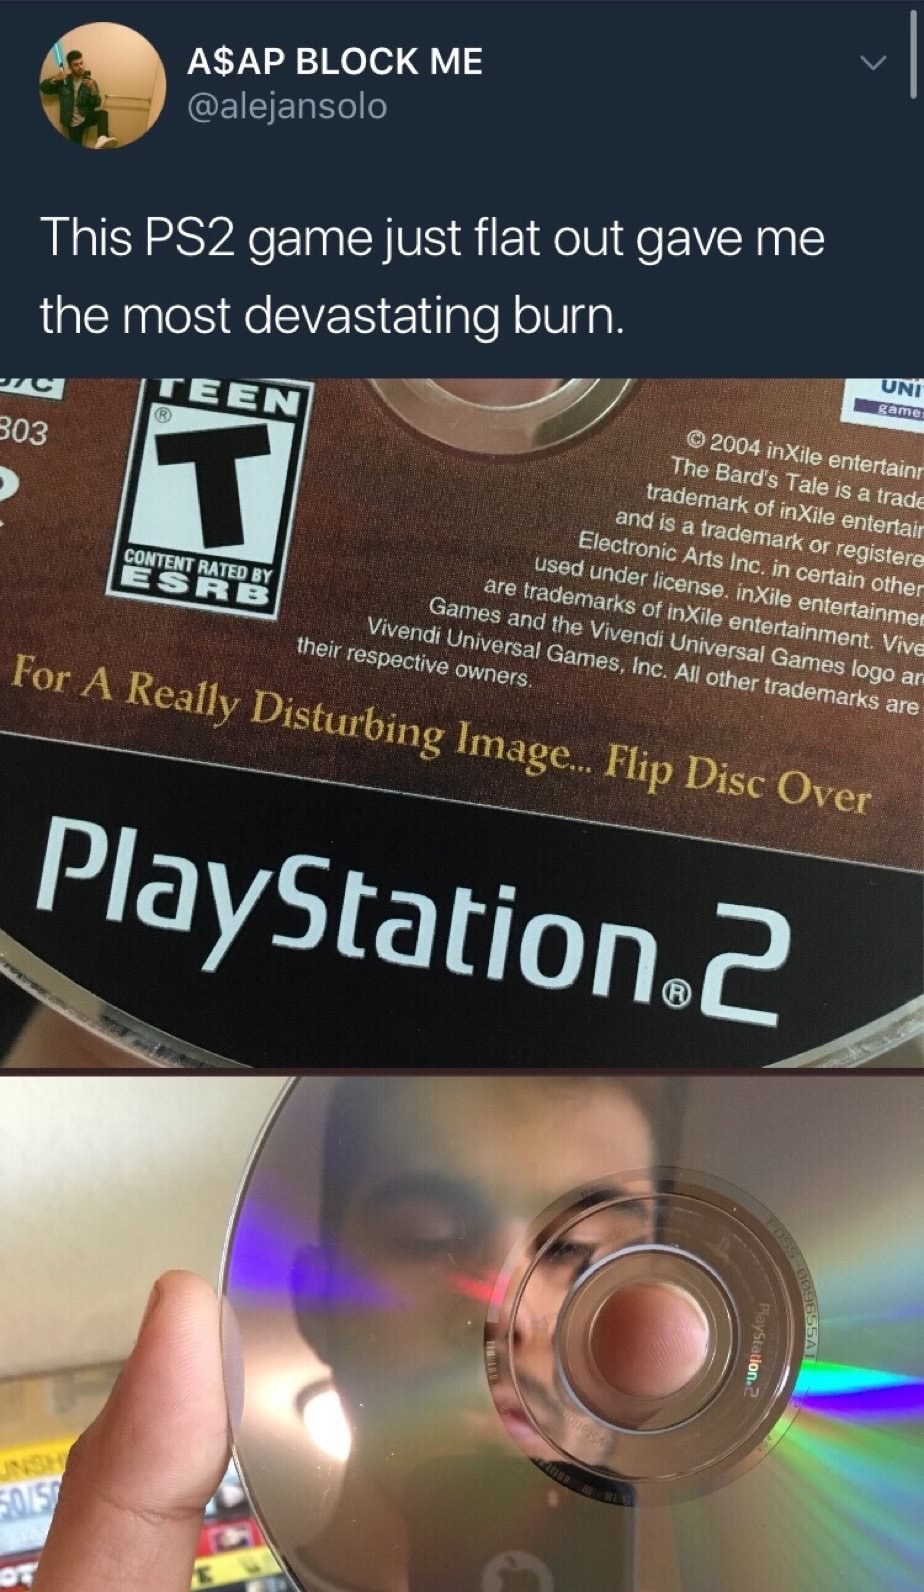 really disturbing image flip disc over - A$Ap Block Me This PS2 game just flat out gave me the most devastating burn. Teen Uni game 303 2004 inXile entertain The Bard's Tale is a trade trademark of inXile entertain and is a trademark or registere Electron